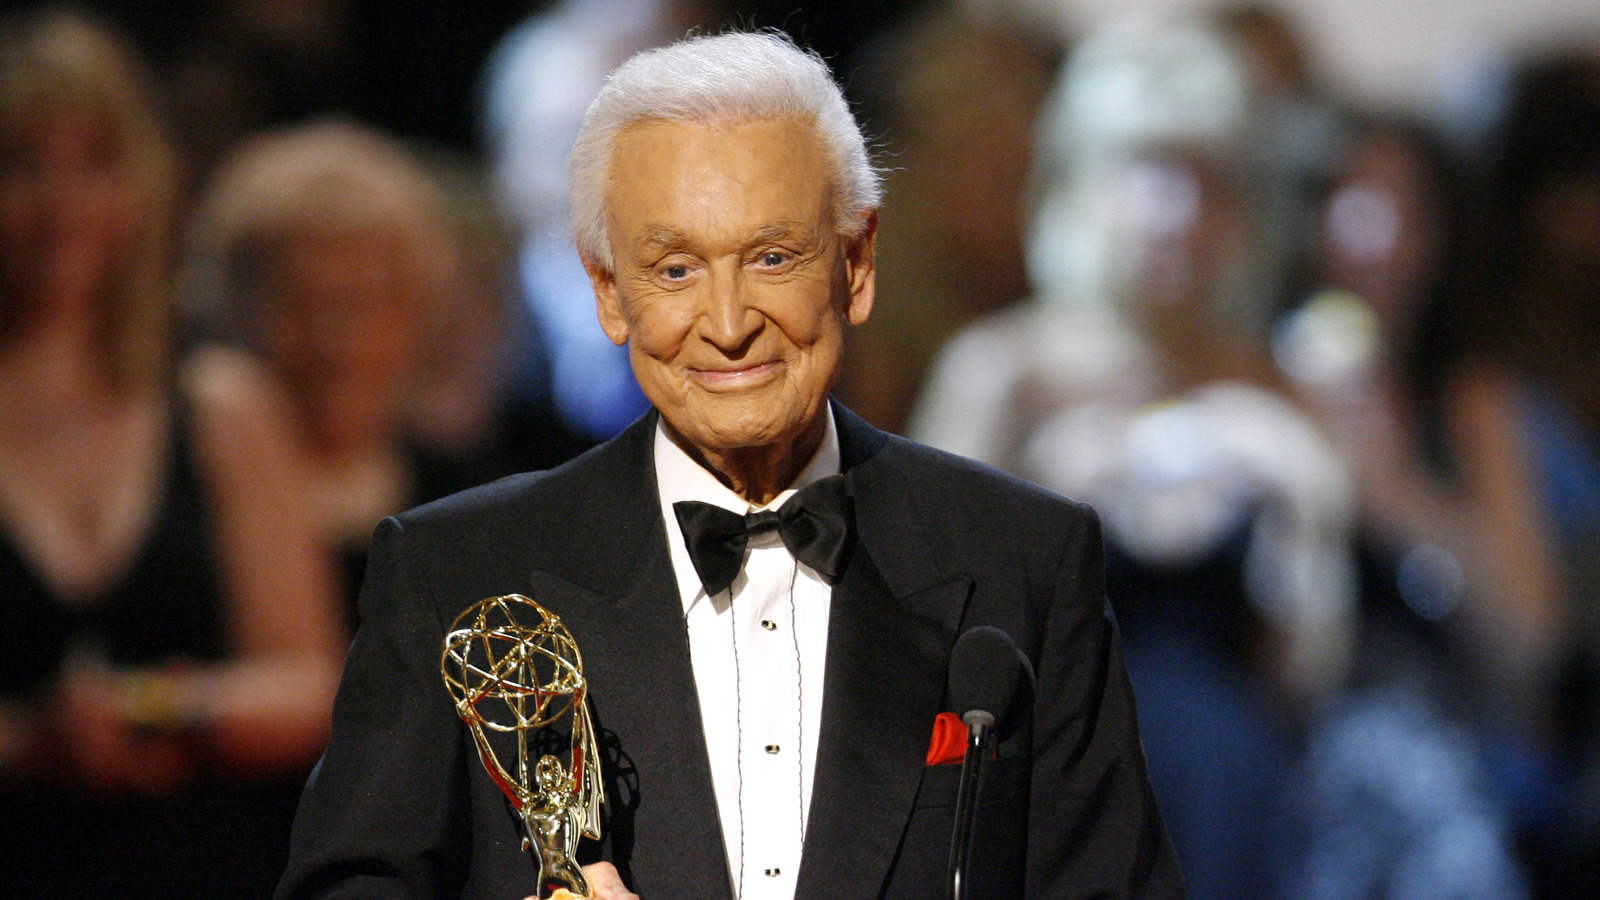 Who Was Bob Barker's Wife? All About Dorothy Jo Gideon